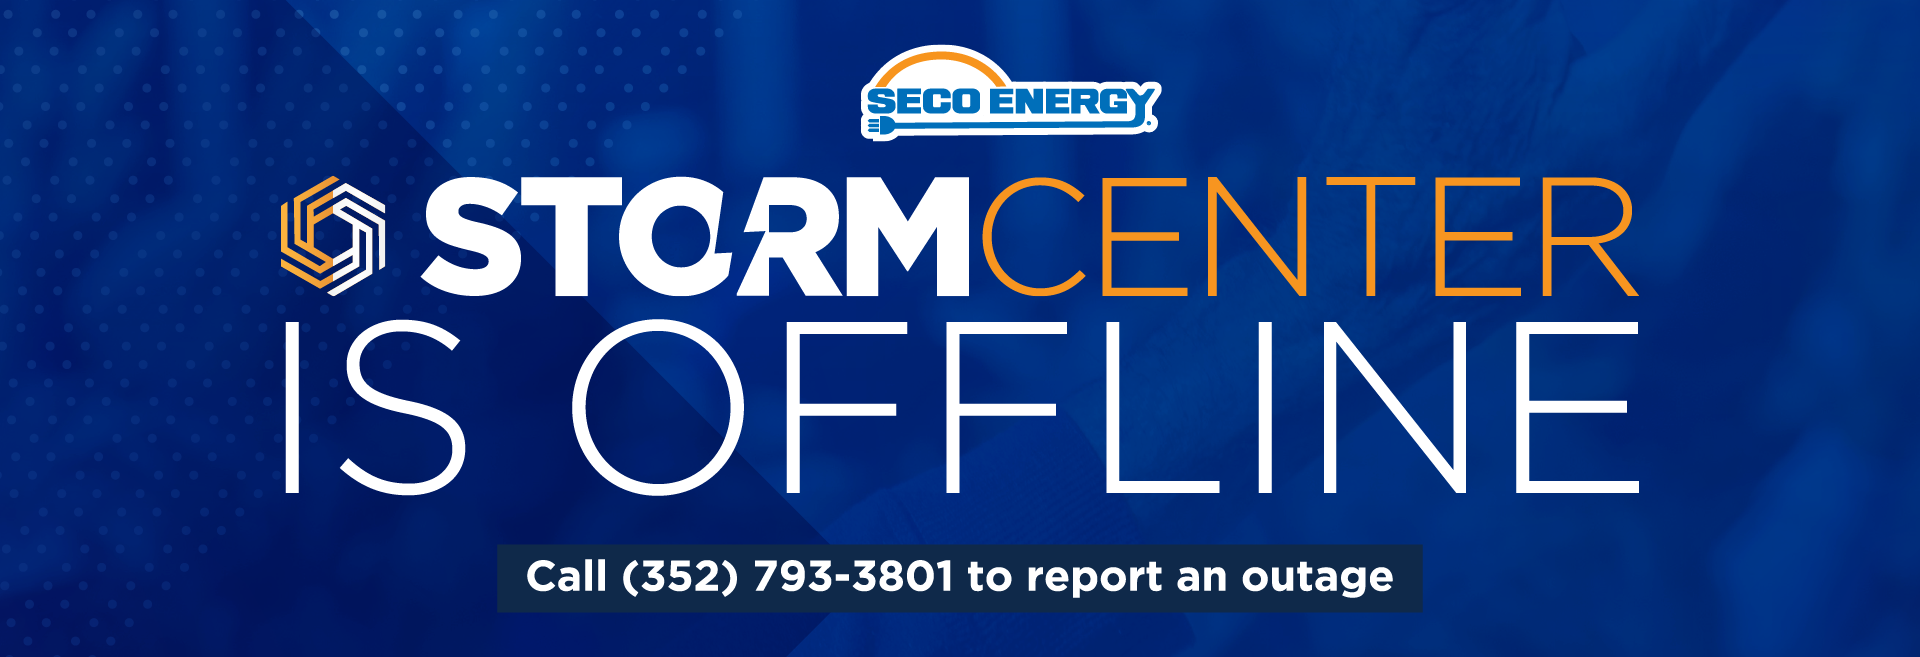 SECO Energy StormCenter is offline - Call 352 793 3801 to report an outage